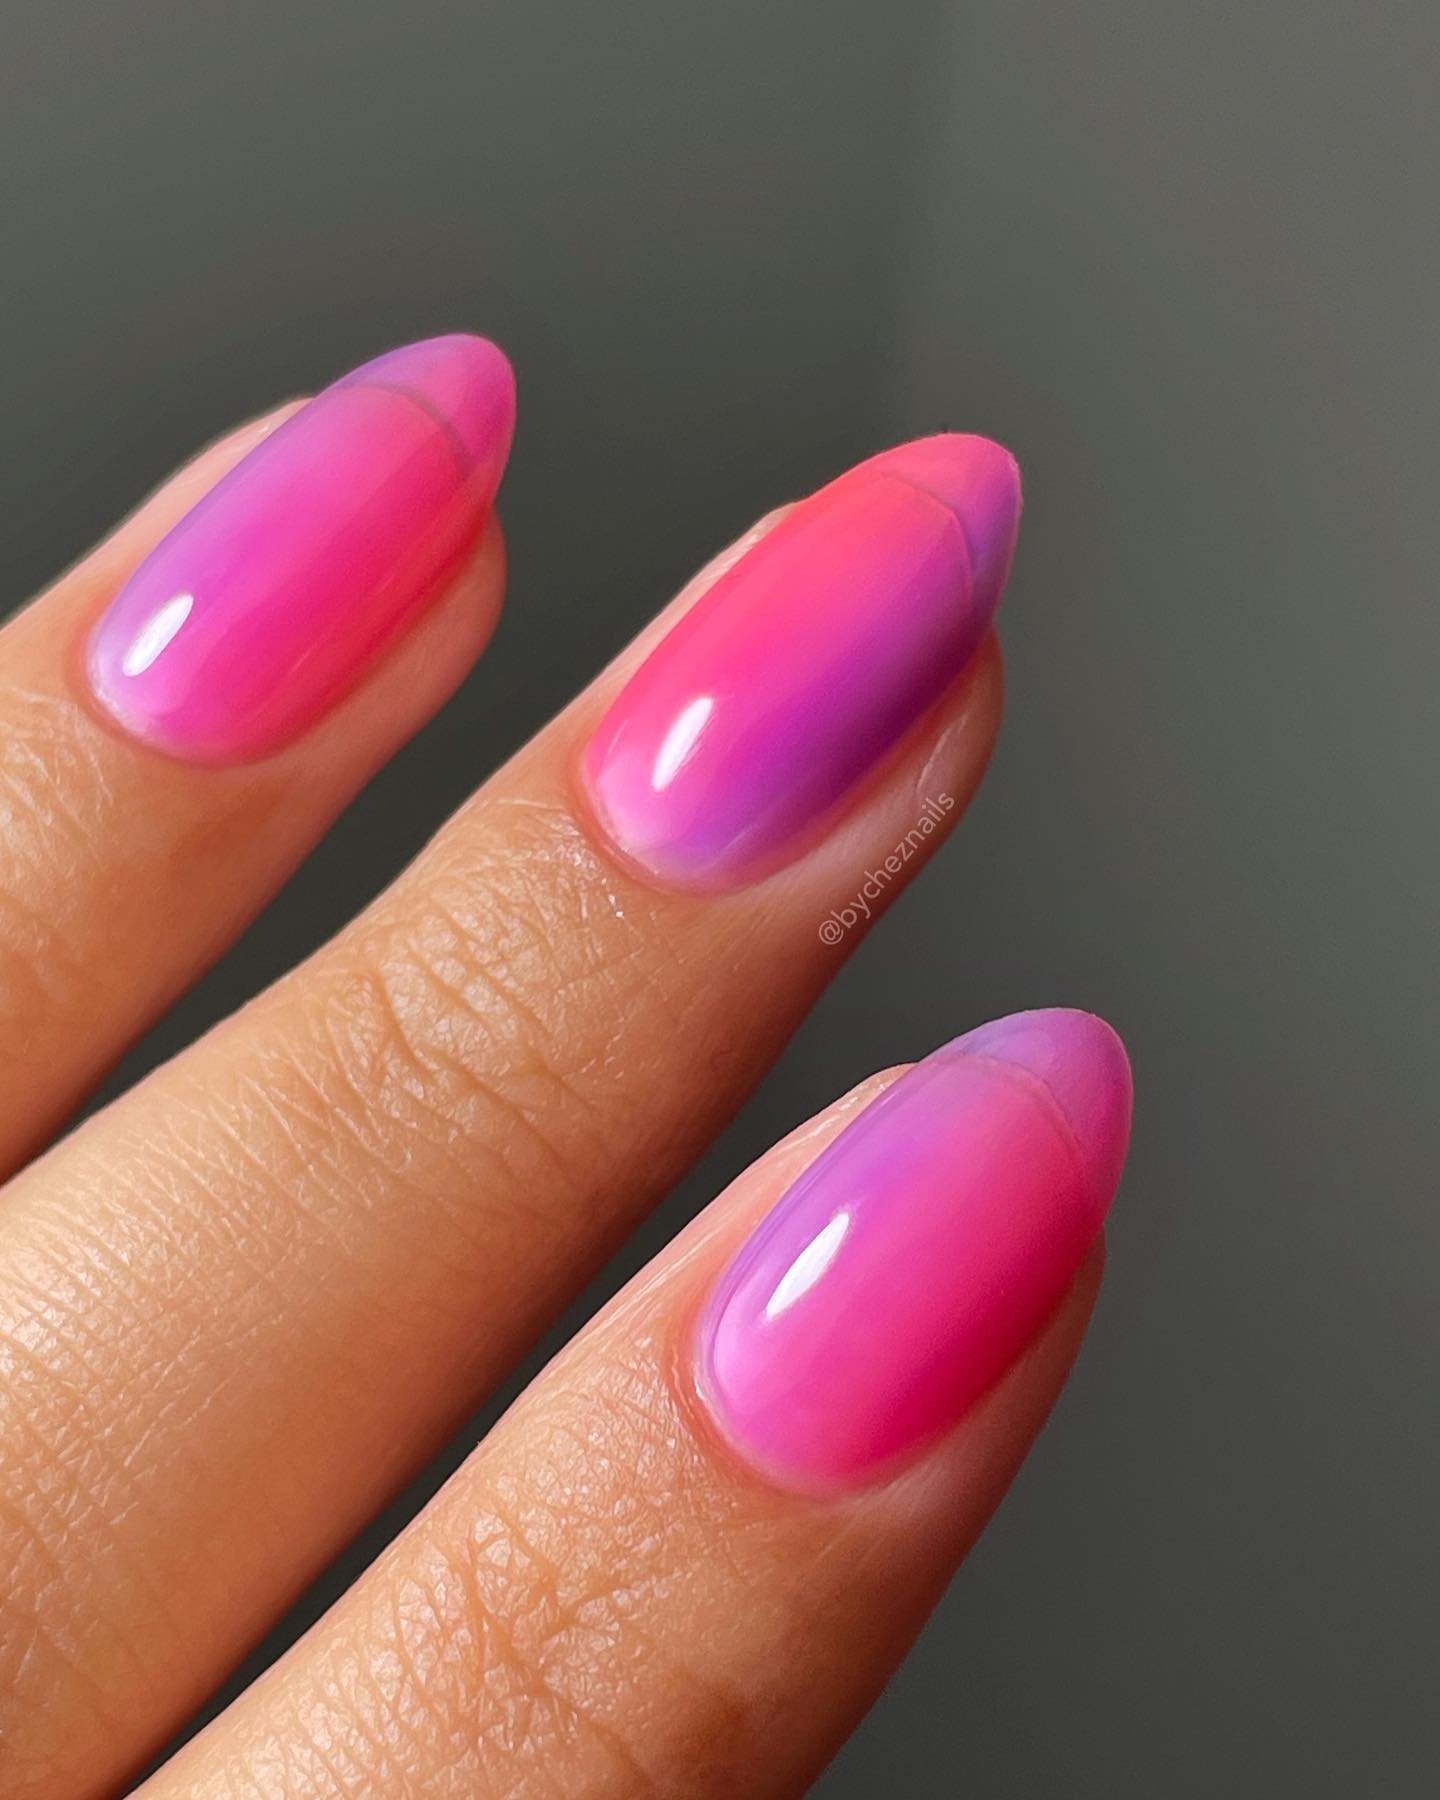 44 - Picture of Jelly Nails